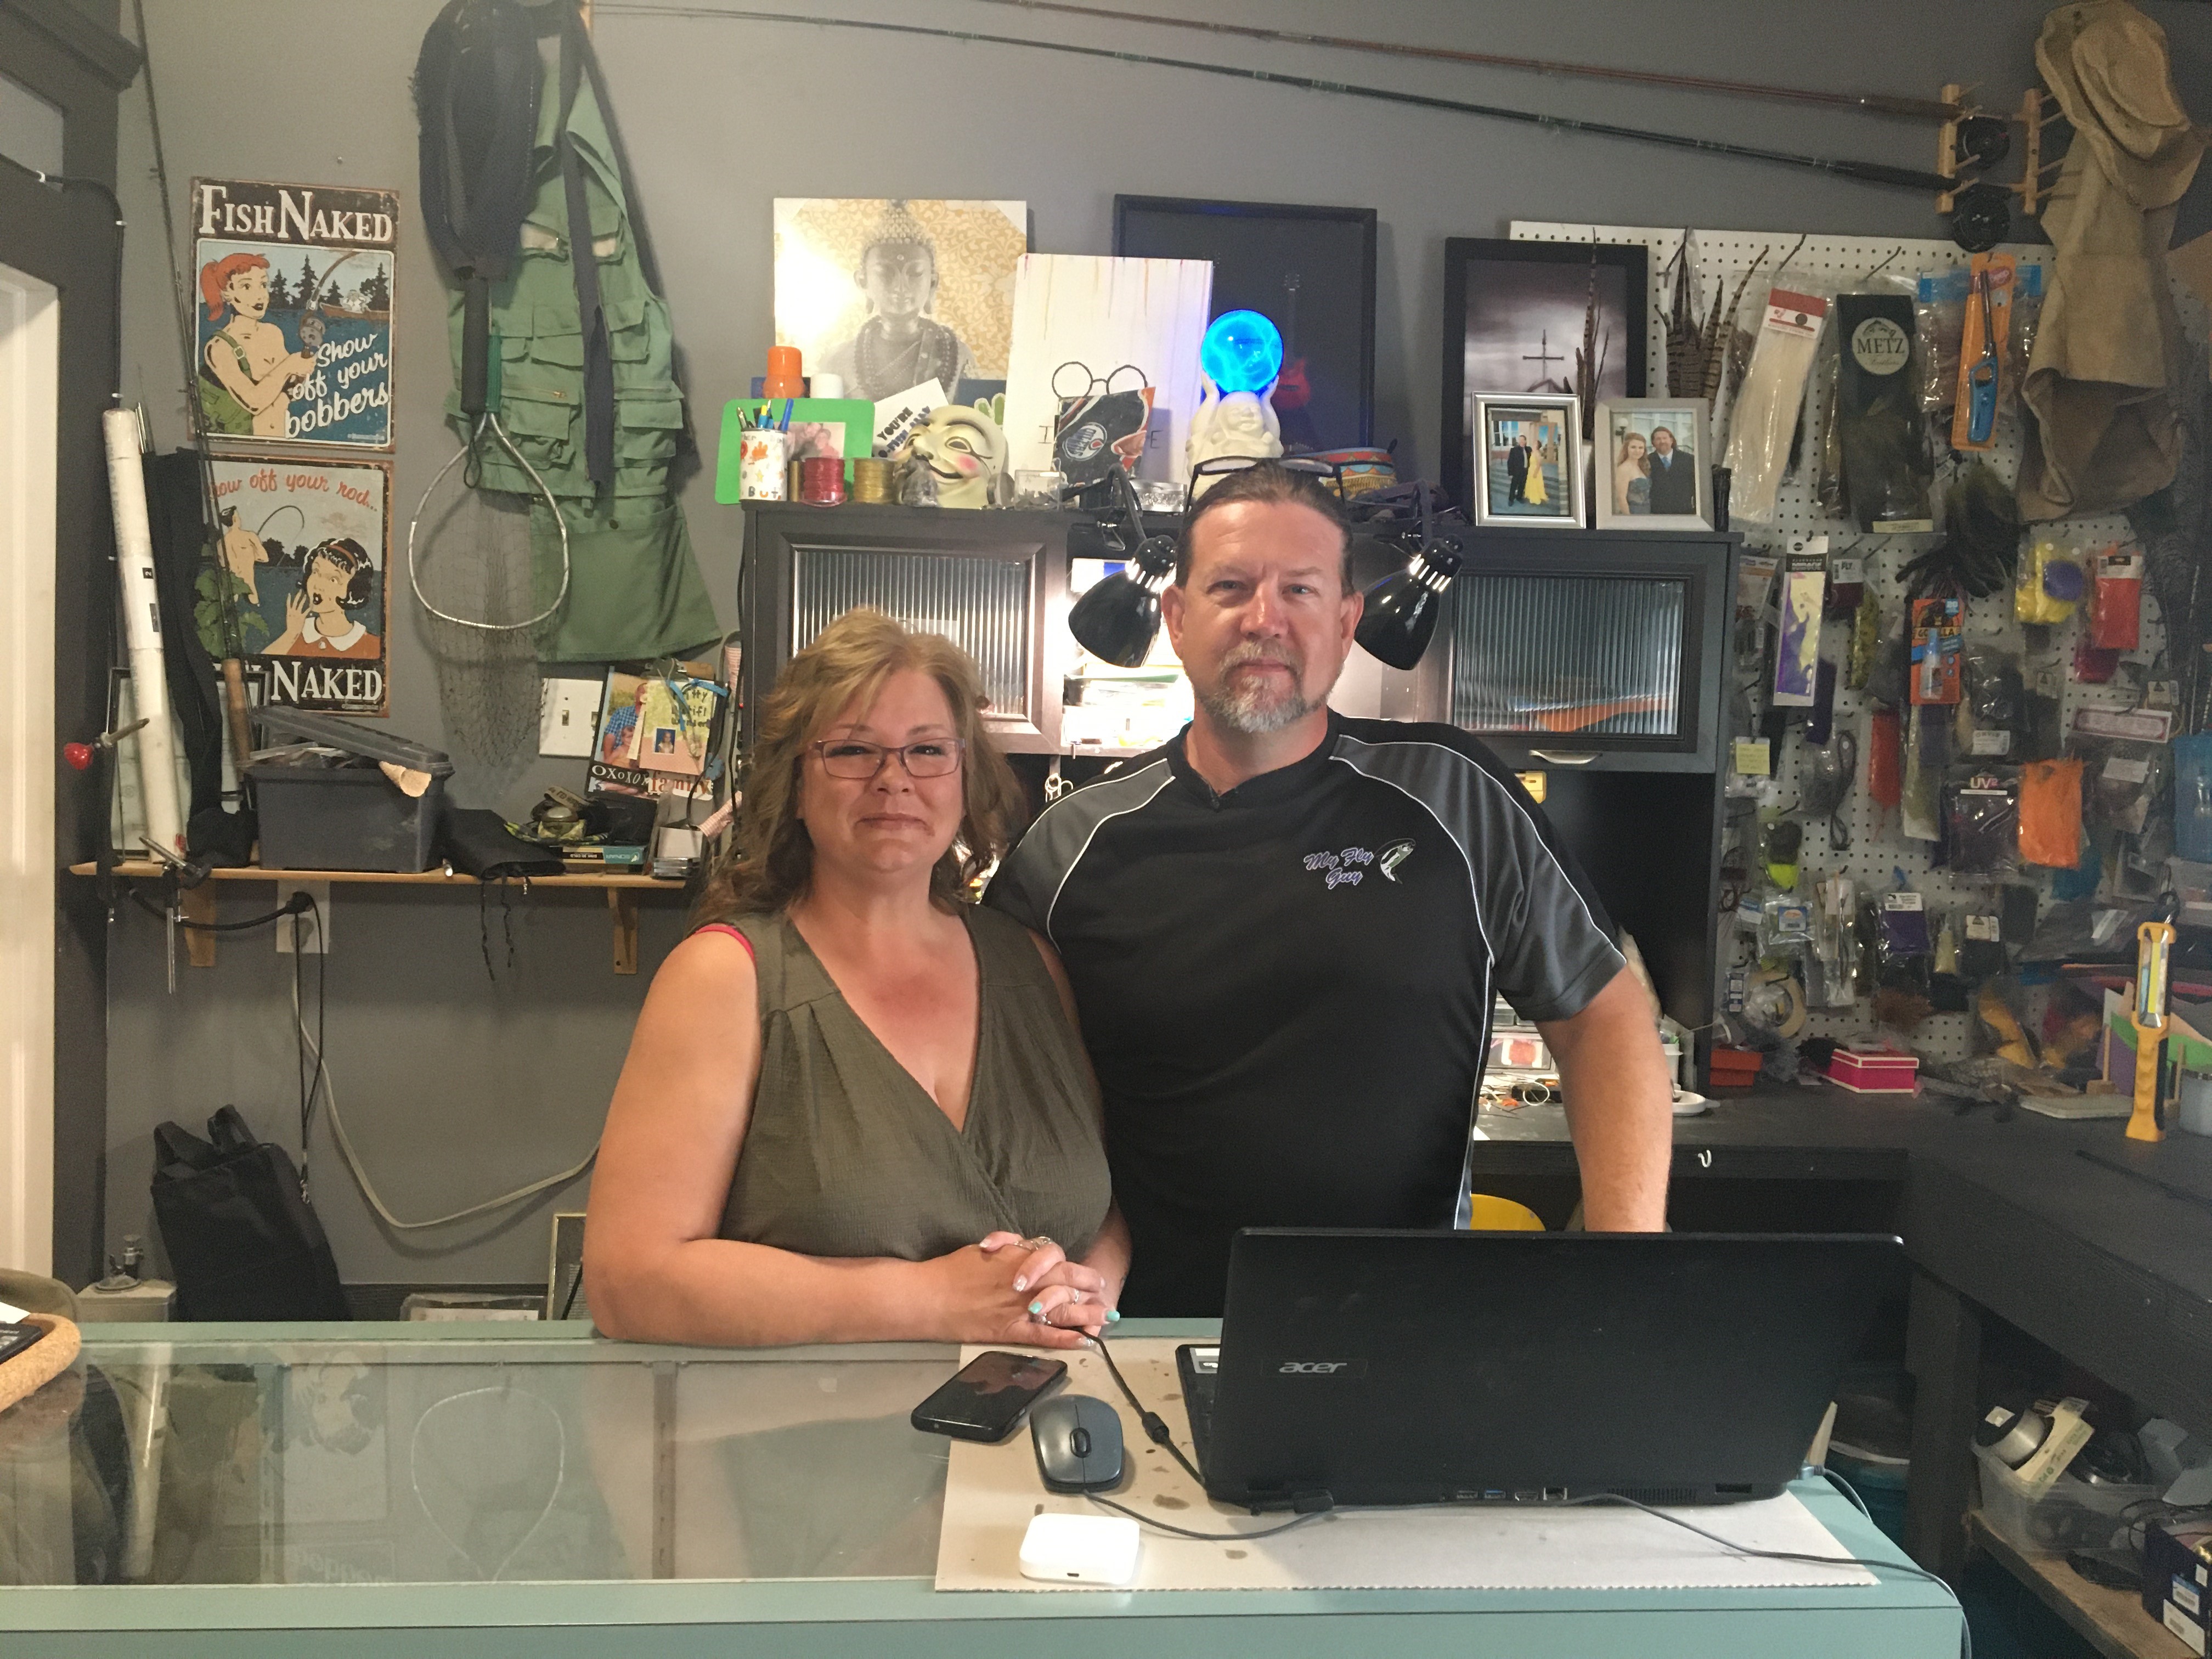 Local fly fishing shop gains new customers, reminds fishers of regulations  and best practices - Lethbridge